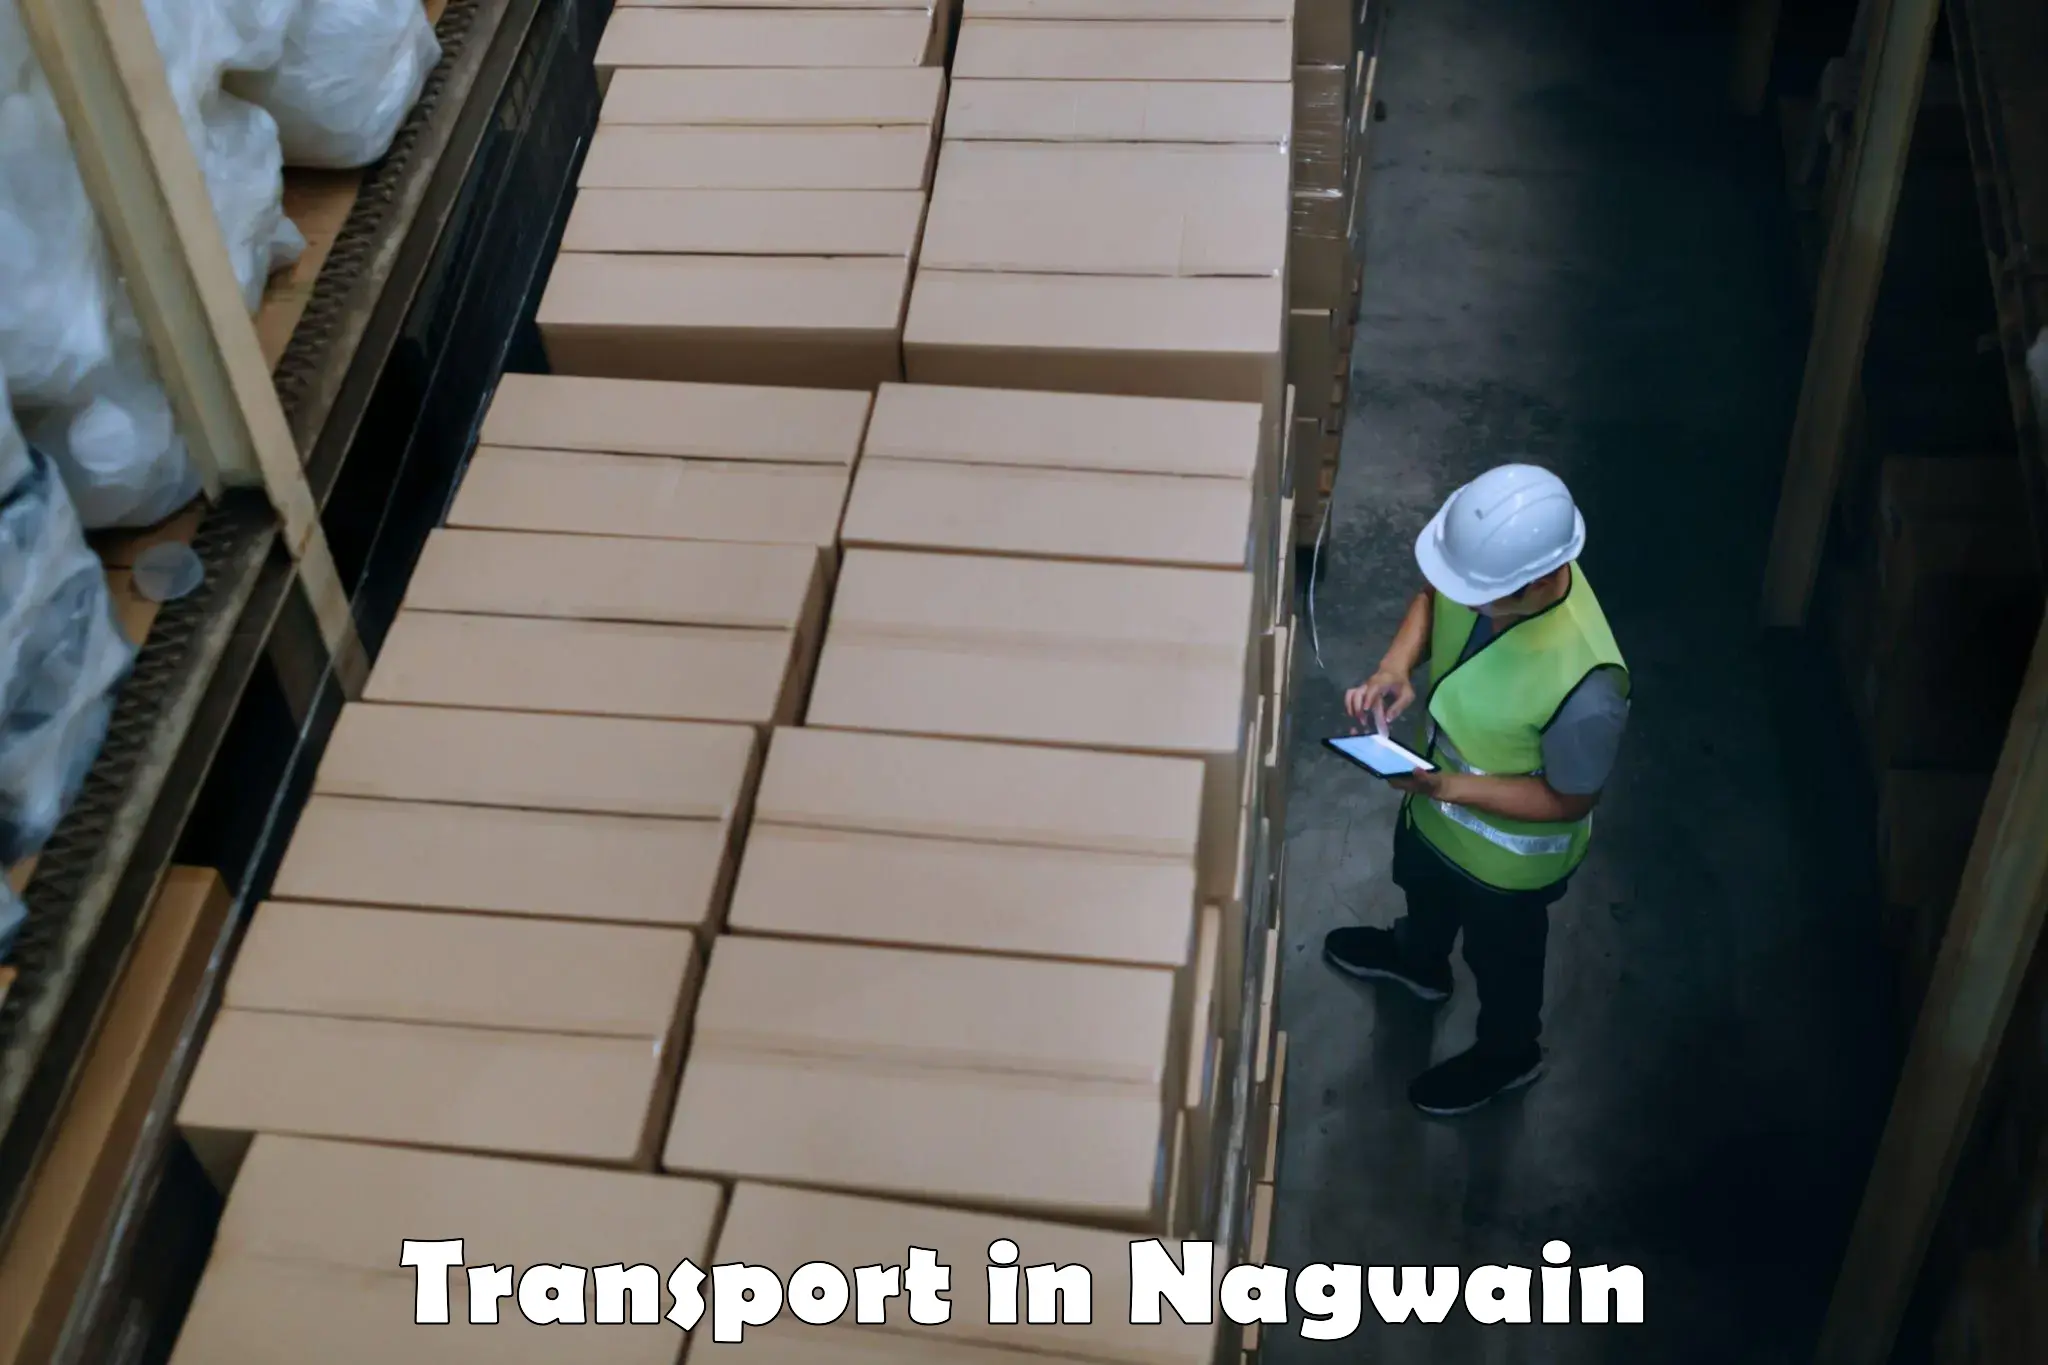 Road transport services in Nagwain